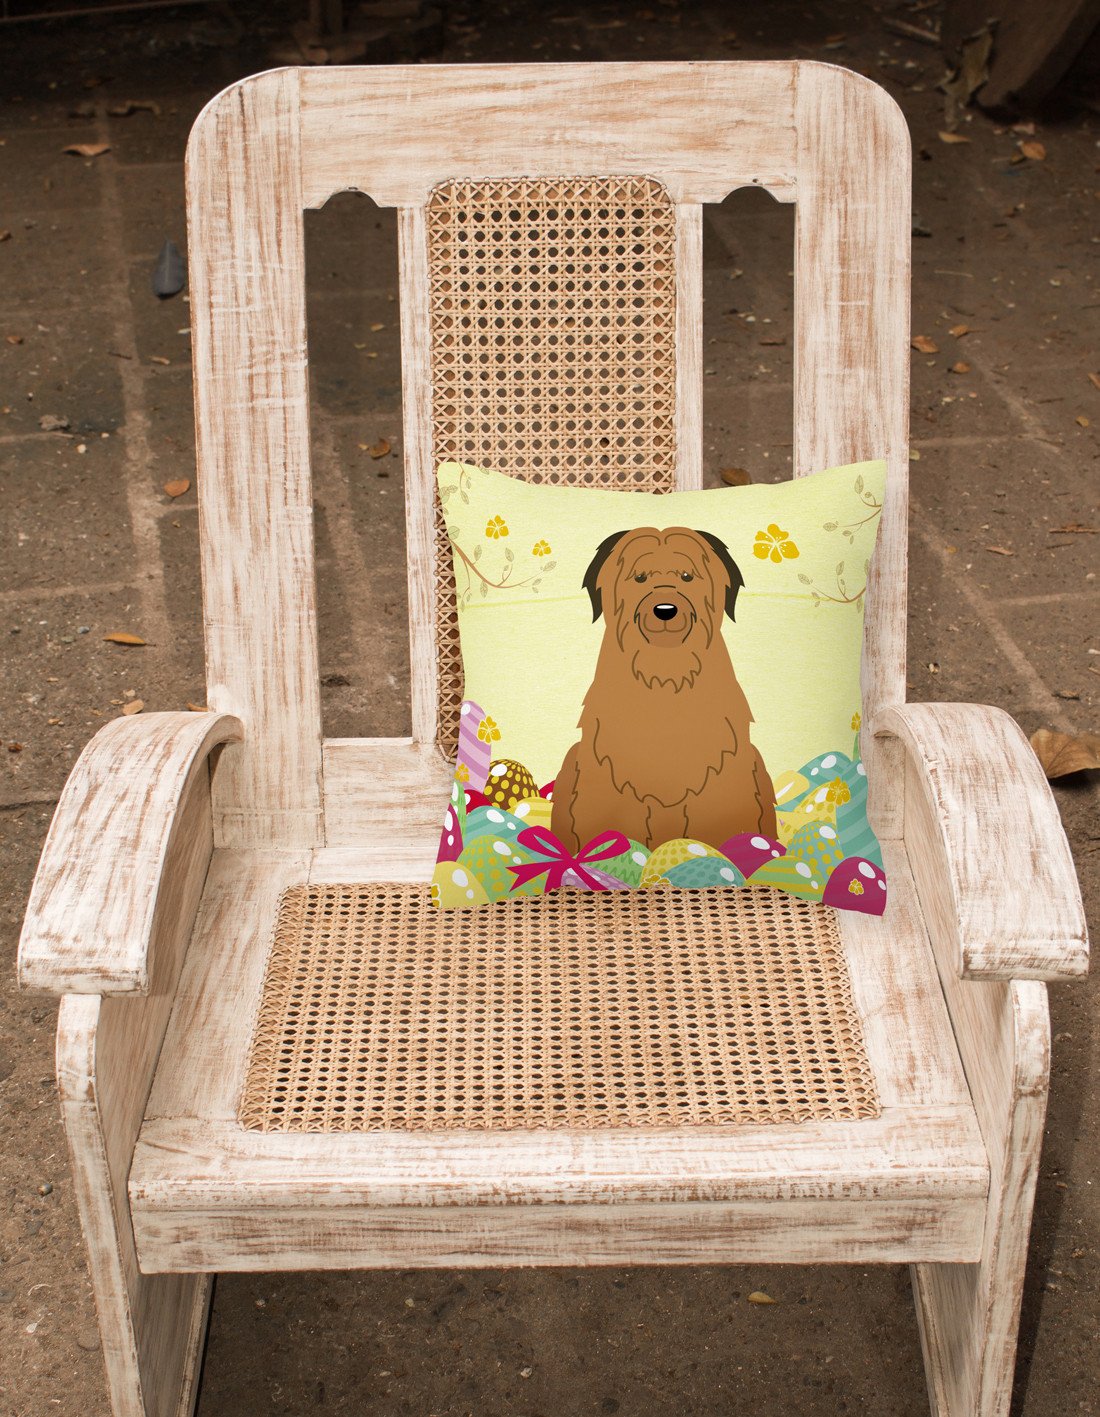 Easter Eggs Briard Brown Fabric Decorative Pillow BB6082PW1818 by Caroline's Treasures